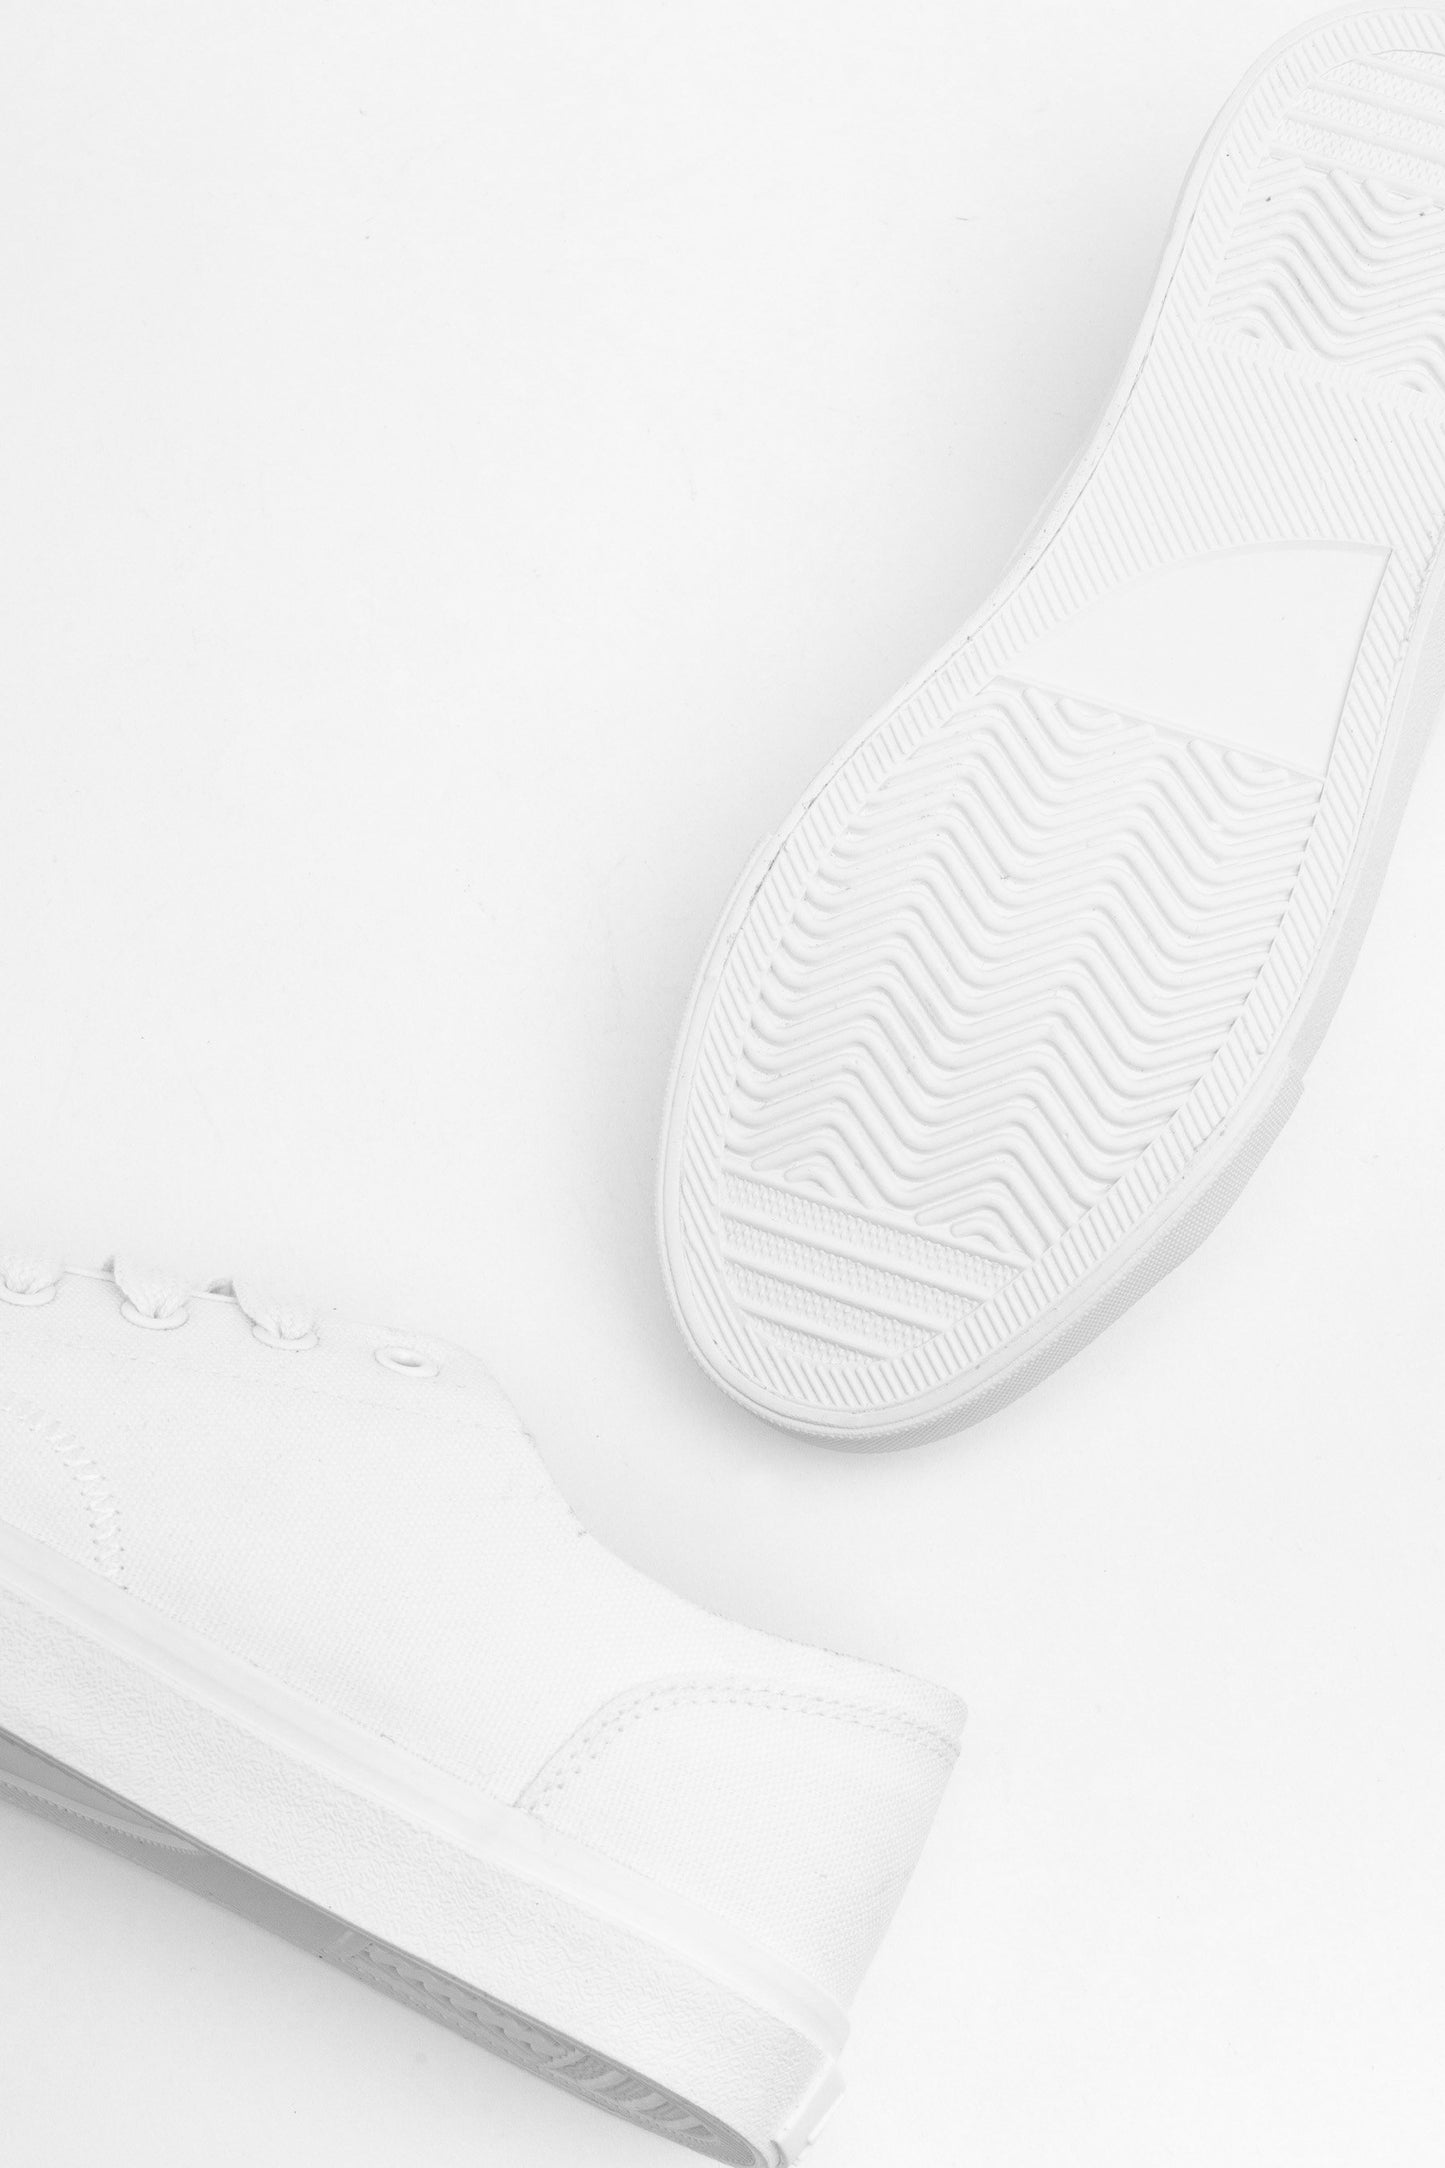 HYPE WHITE PUMP KIDS TRAINERS